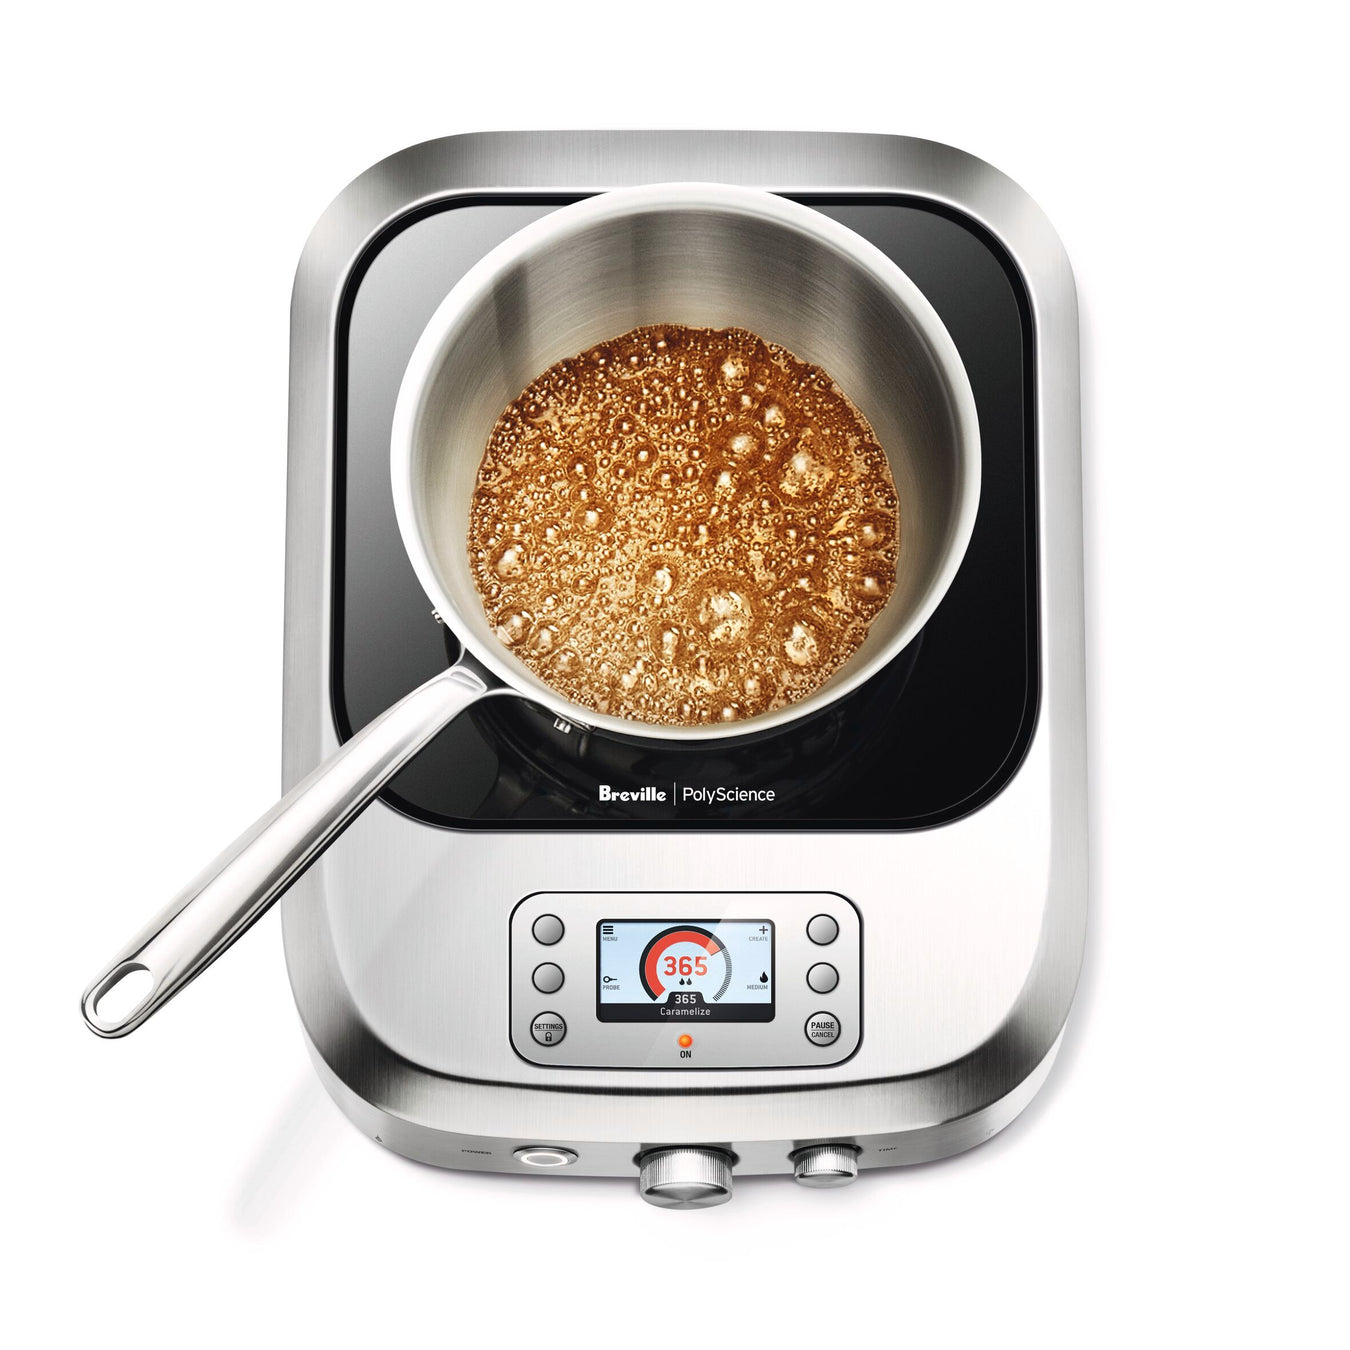 Matfer introduces pasta makers, sous-vide, meat grinders and smokers